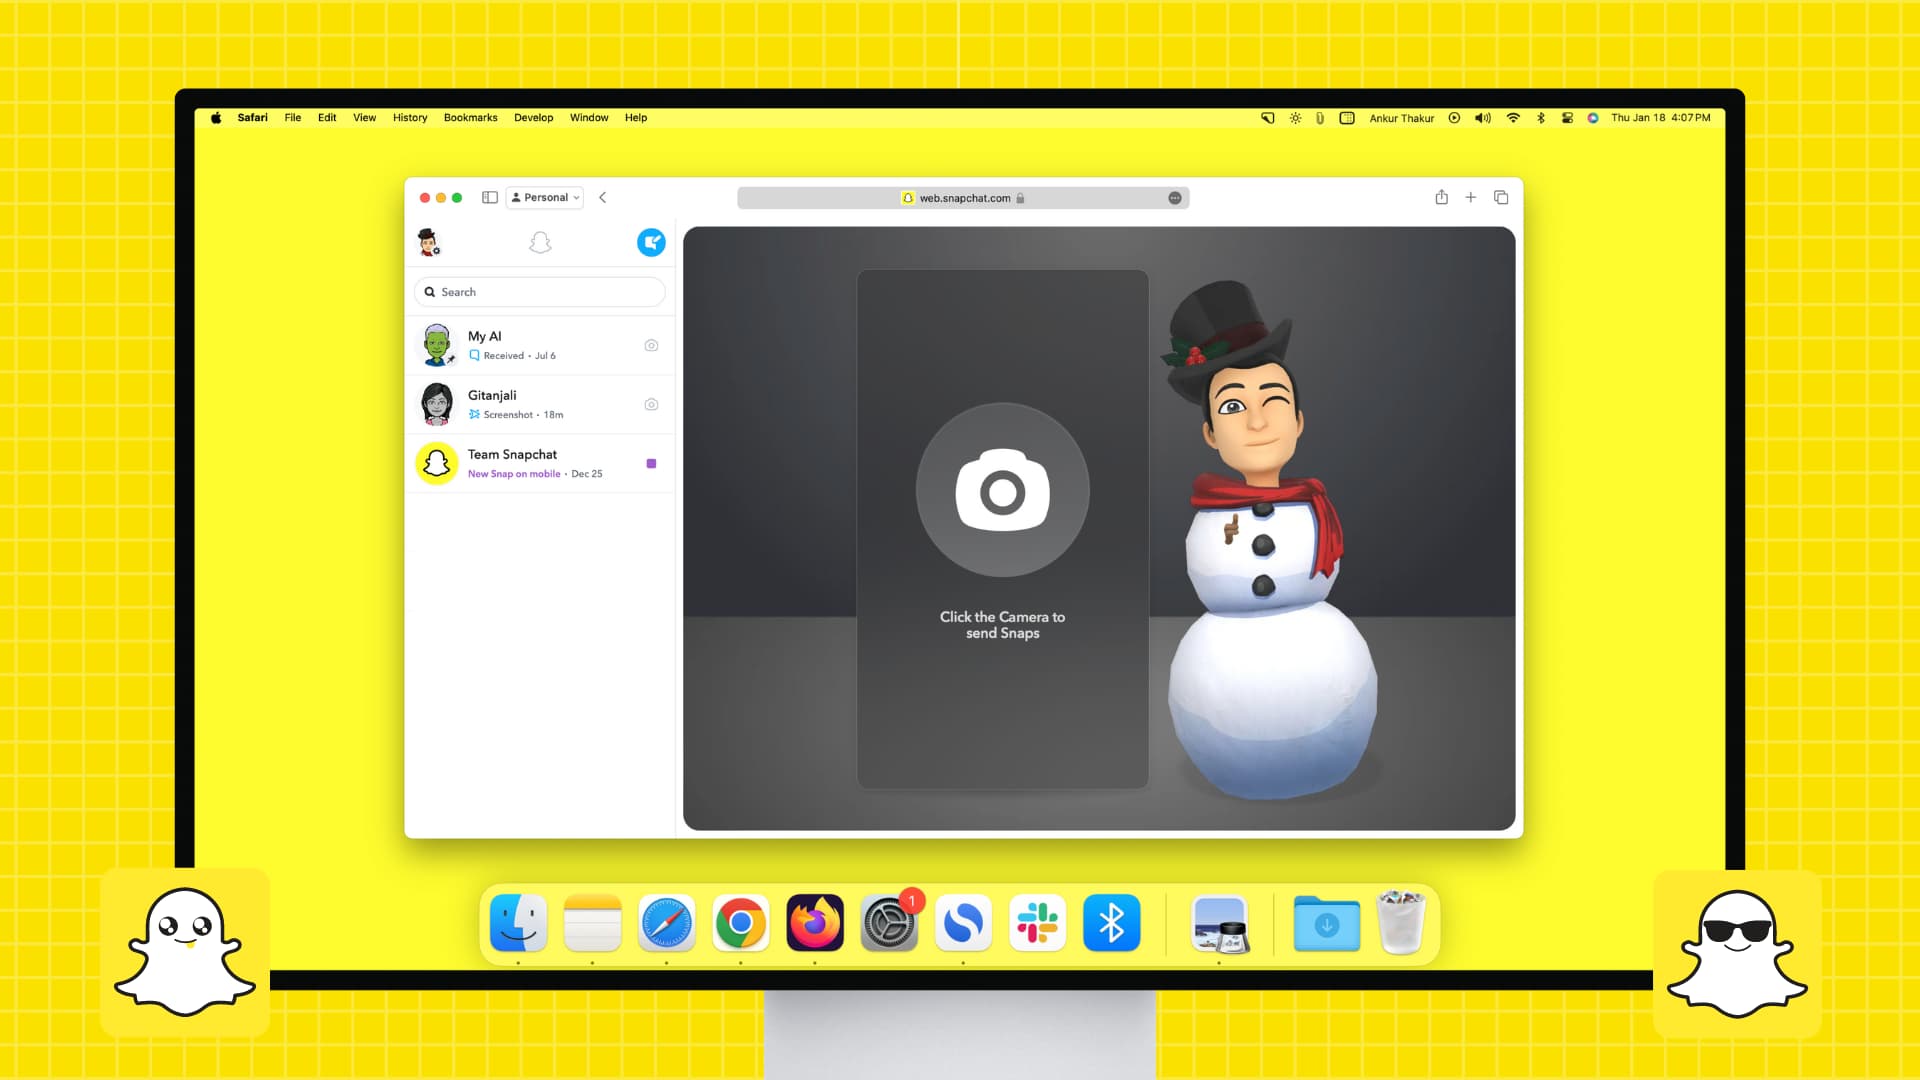 How to use Snapchat on your Mac or Windows PC